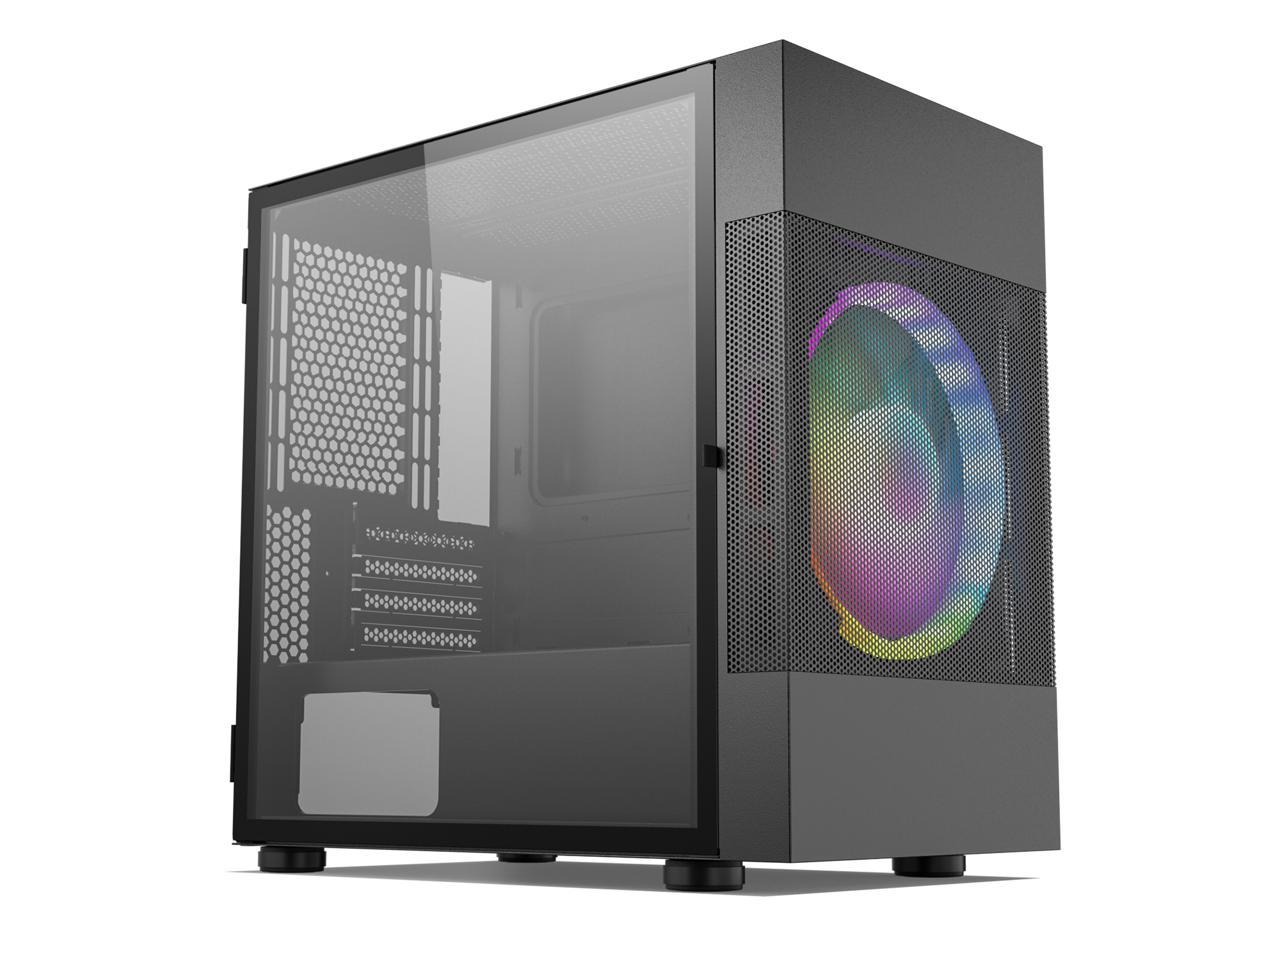 M22 Balck Vetroo darkFlash Micro ATX Mini ITX MicroATX MATX Computer Case with Tempered Glass Door and Vetroo 380 Watt Power Supply Front I/O 1X USB 3.0 and Audio in/Out 2X USB 2.0